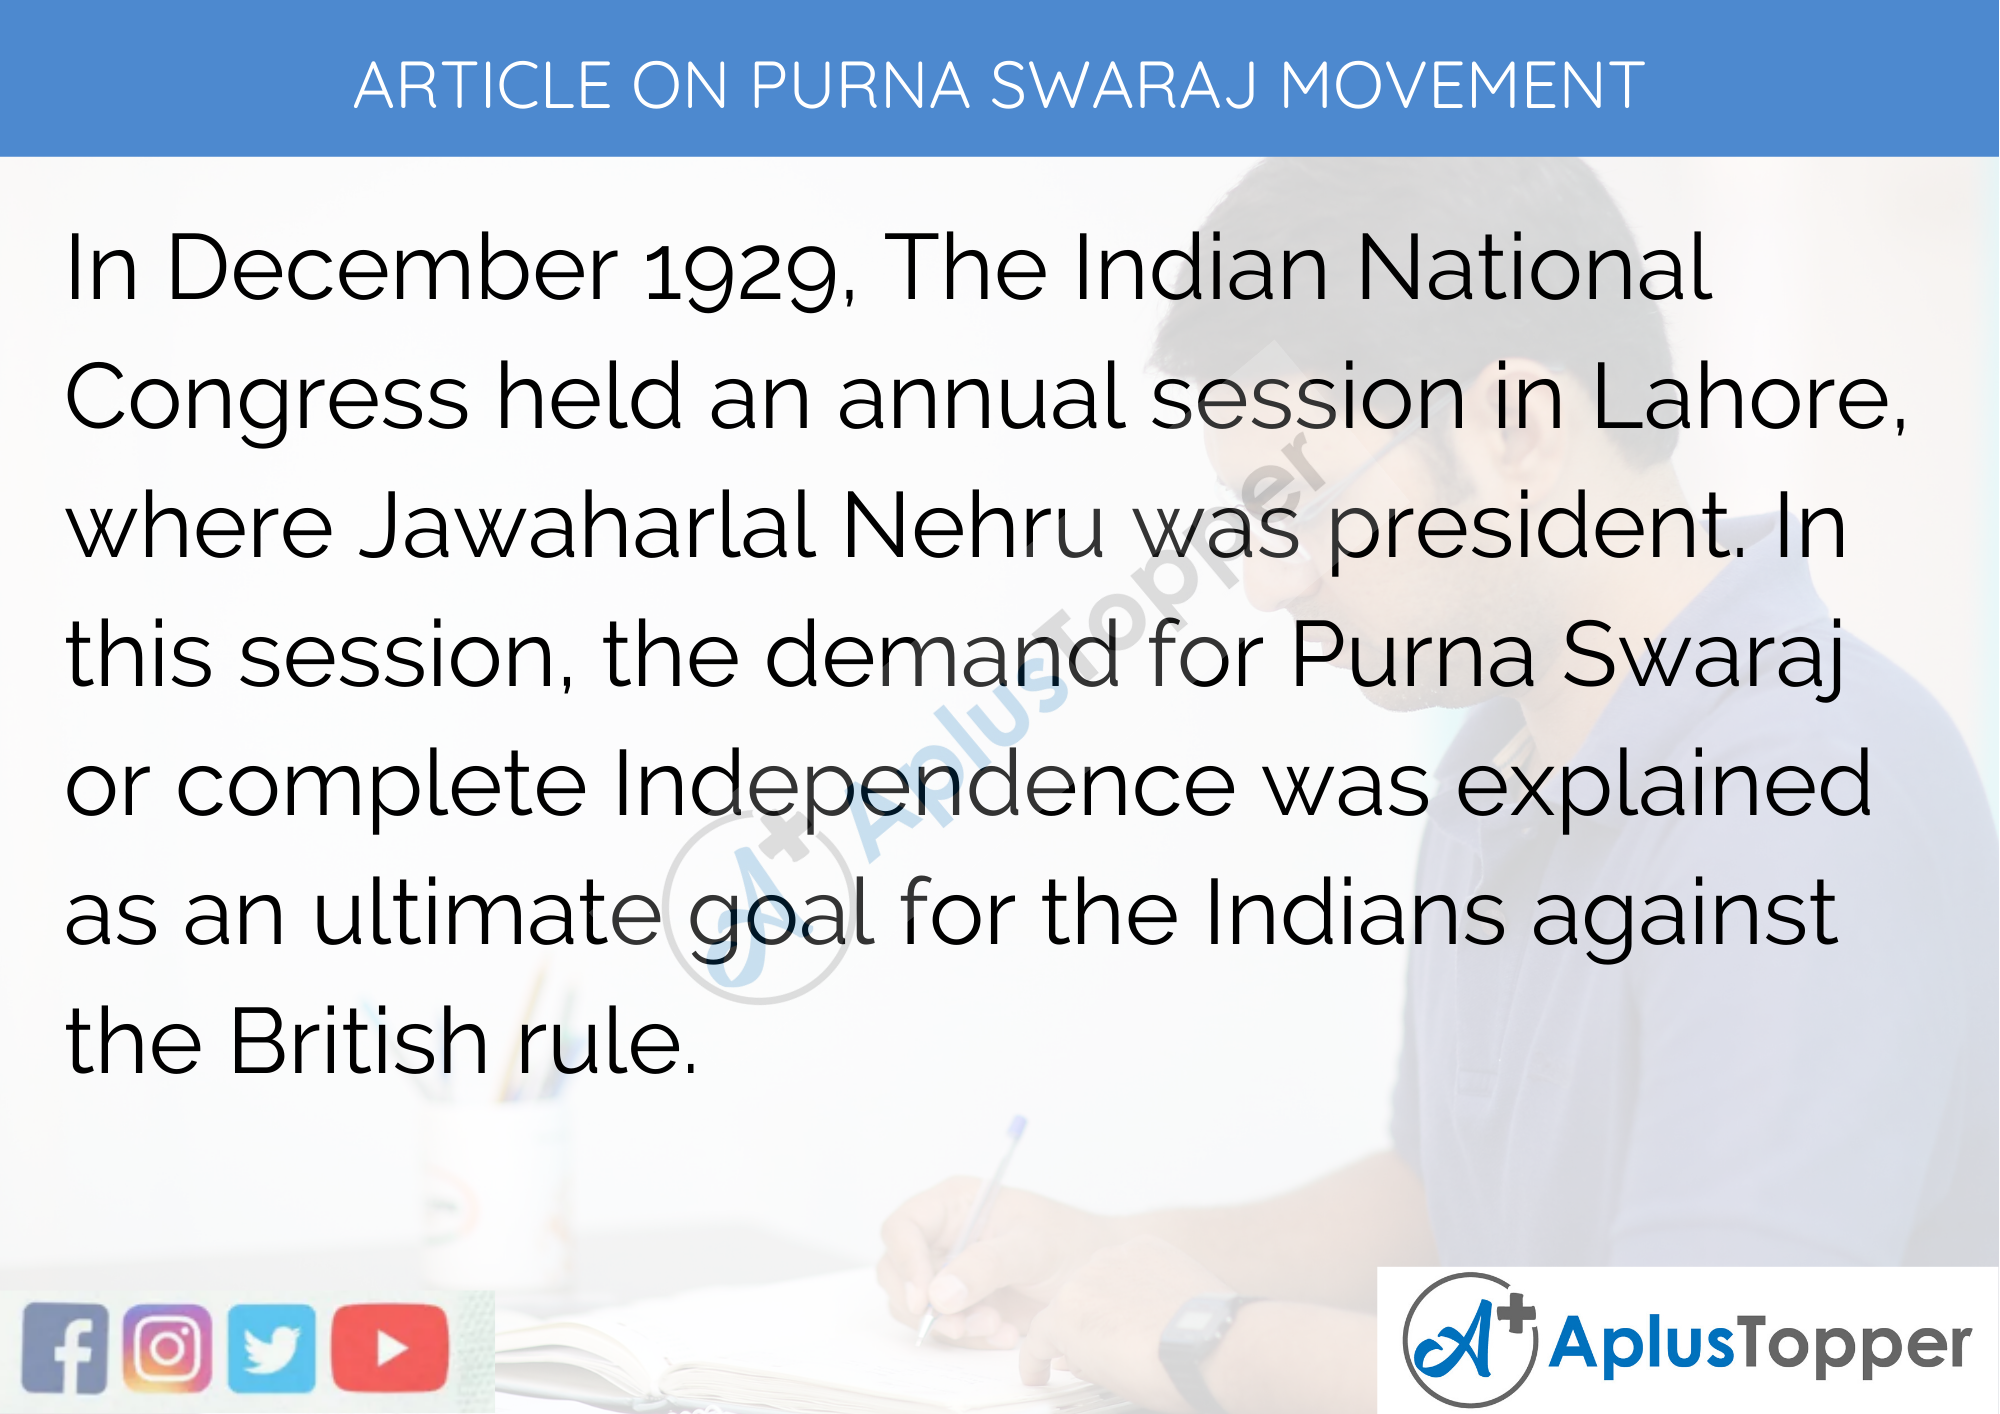 Short Article On Purna Swaraj Movement 300 Words in English